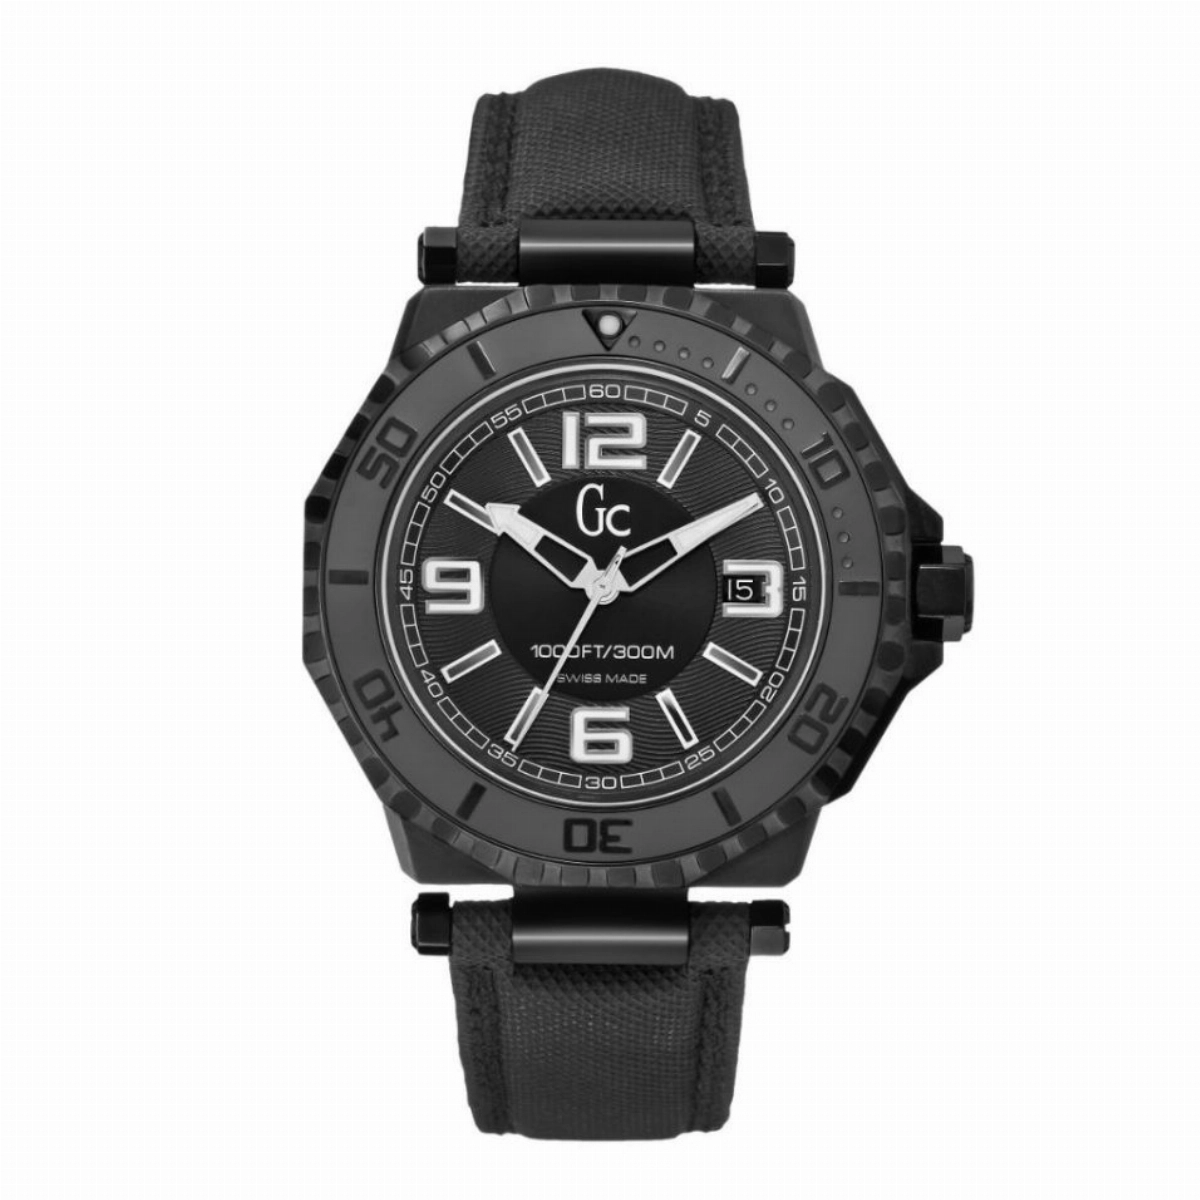 WATCH ANALOG MENS GUESS X79011G2S Gc